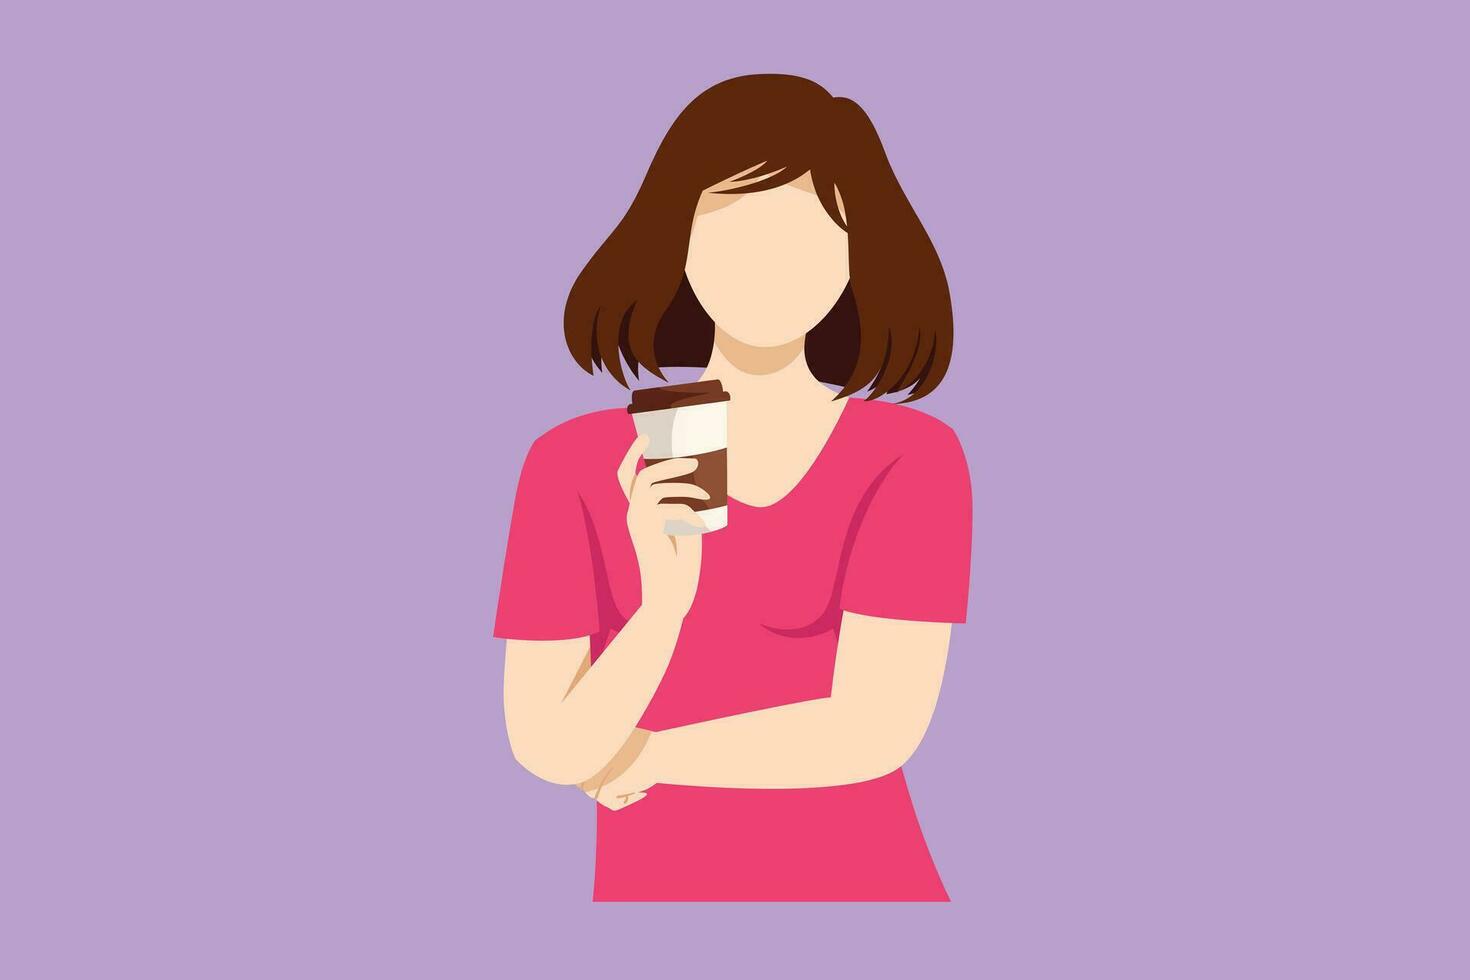 Cartoon flat style drawing young beautiful female college student standing wearing casual shirt holding a paper cup of coffee drink. Drinking tea zero waste concept. Graphic design vector illustration